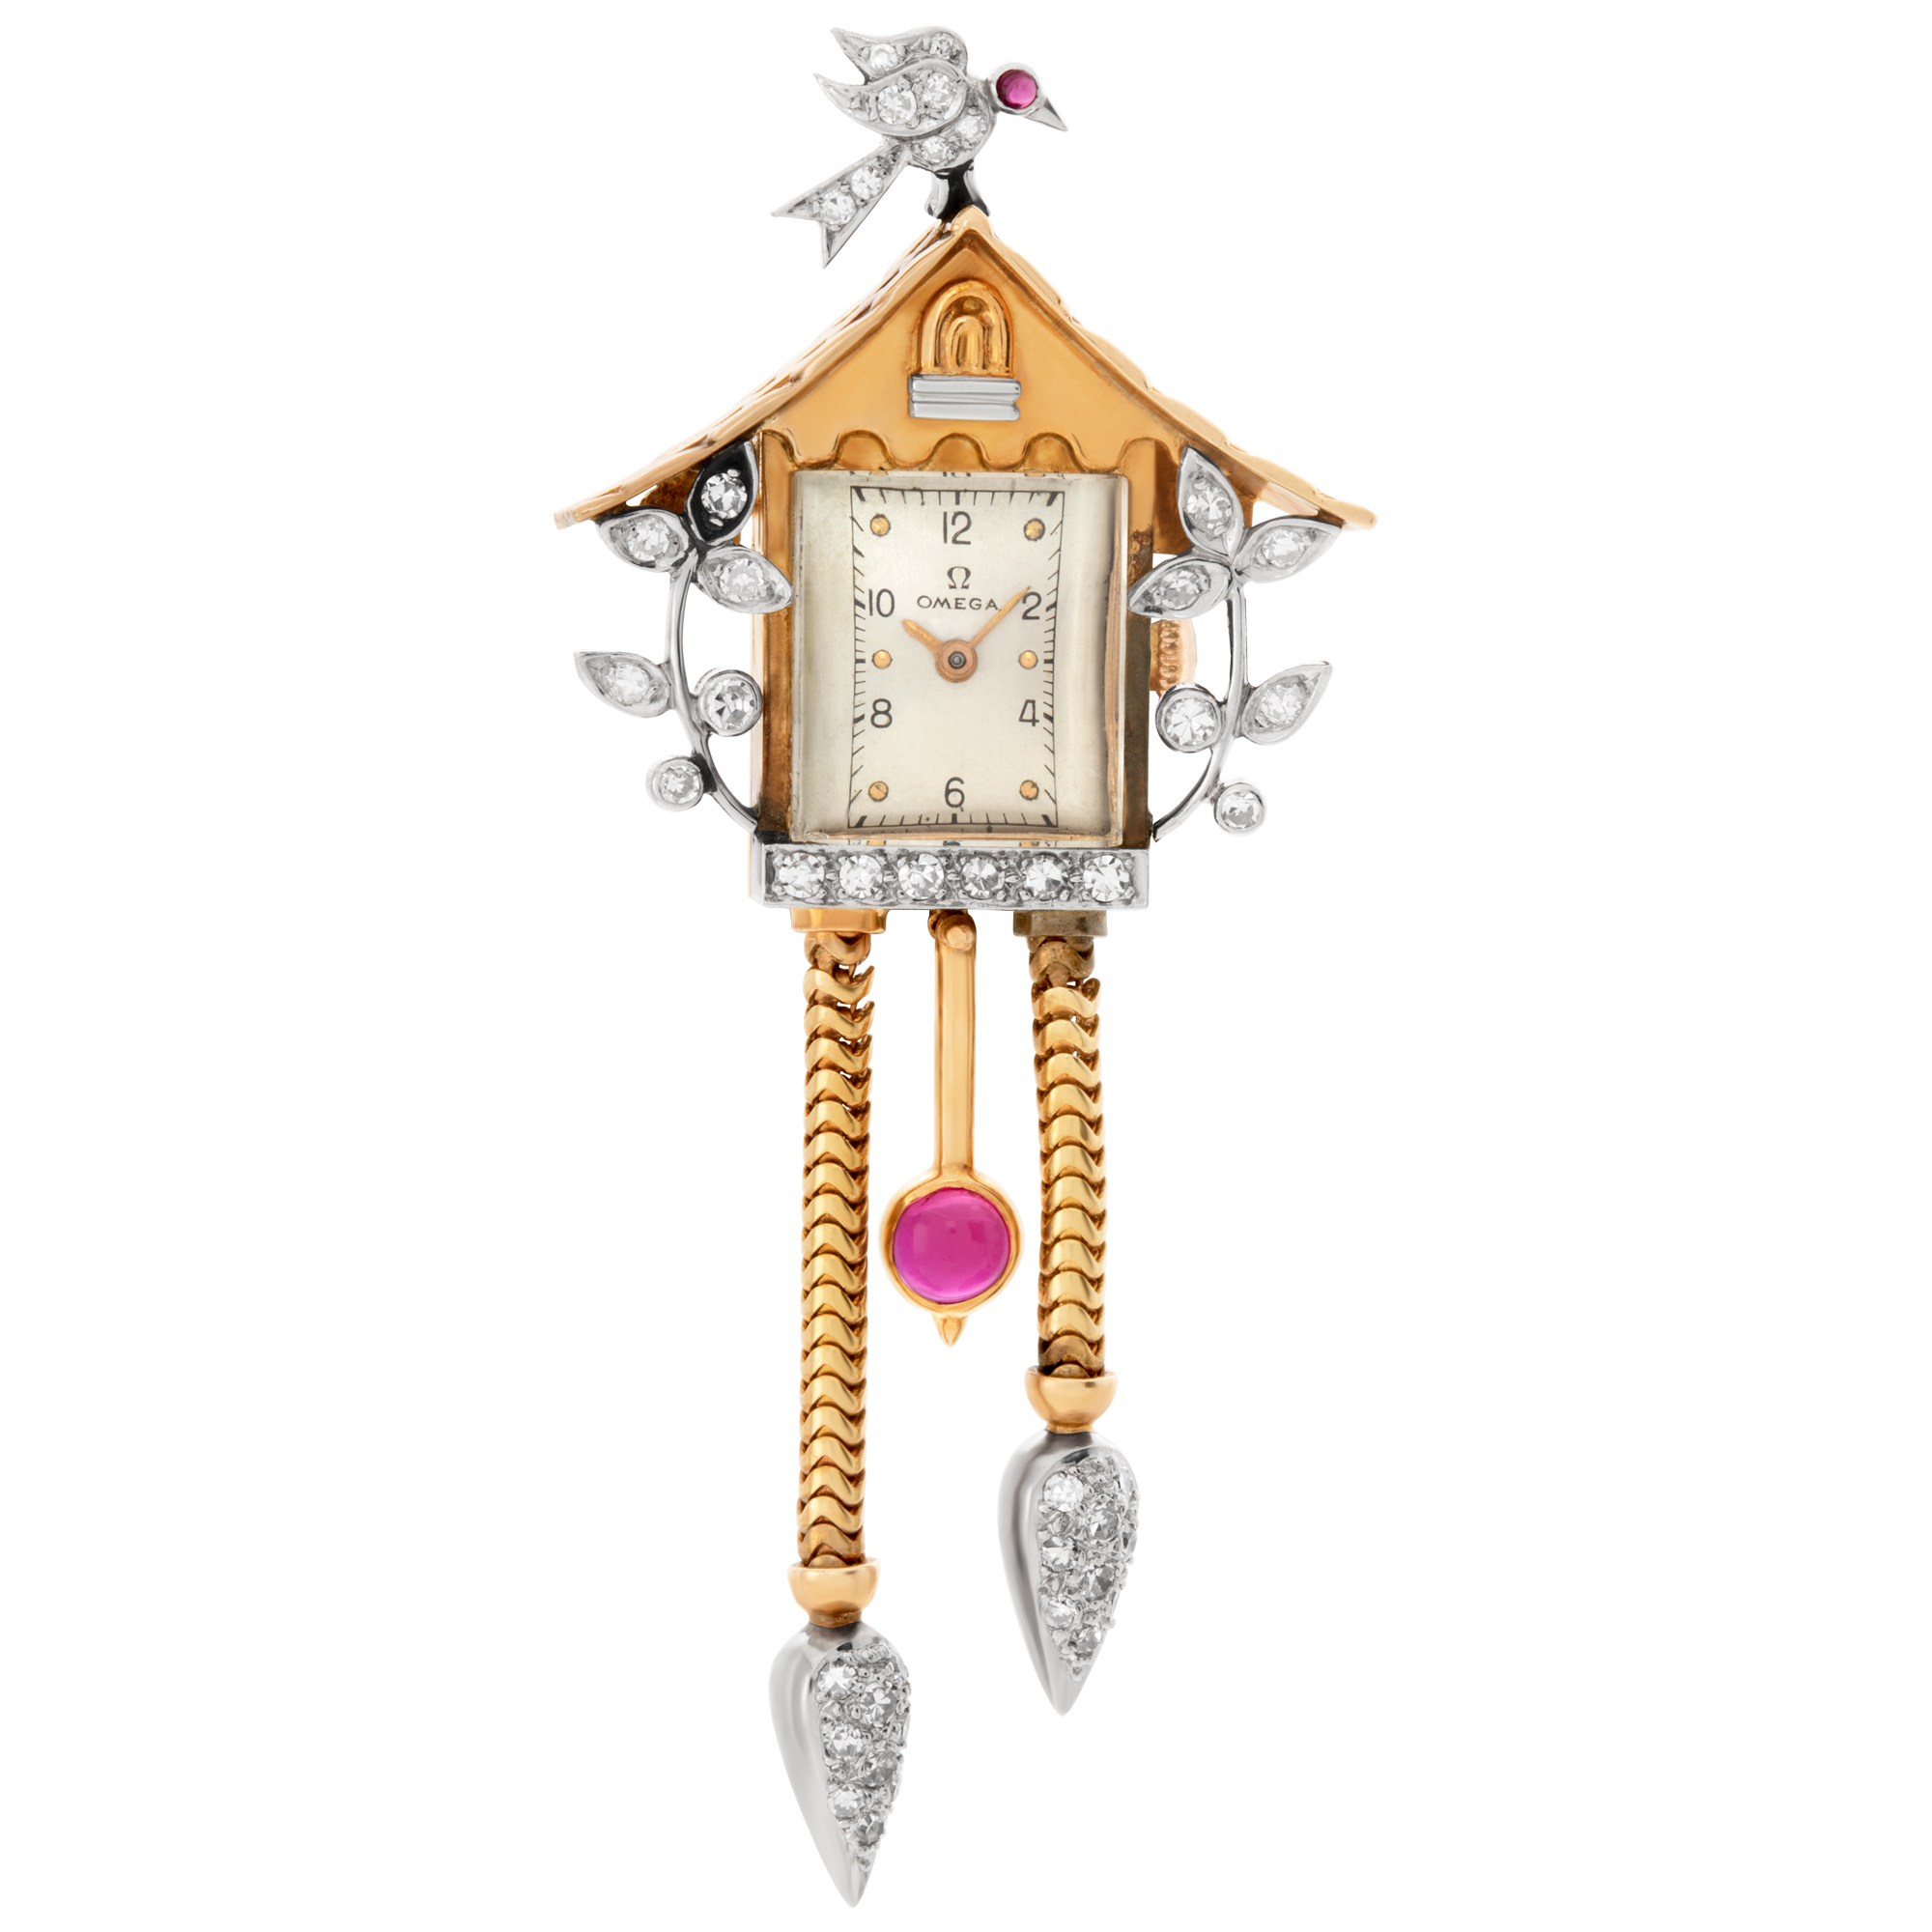 Omega Birdhouse brooch in 14k gold and diamonds image 1